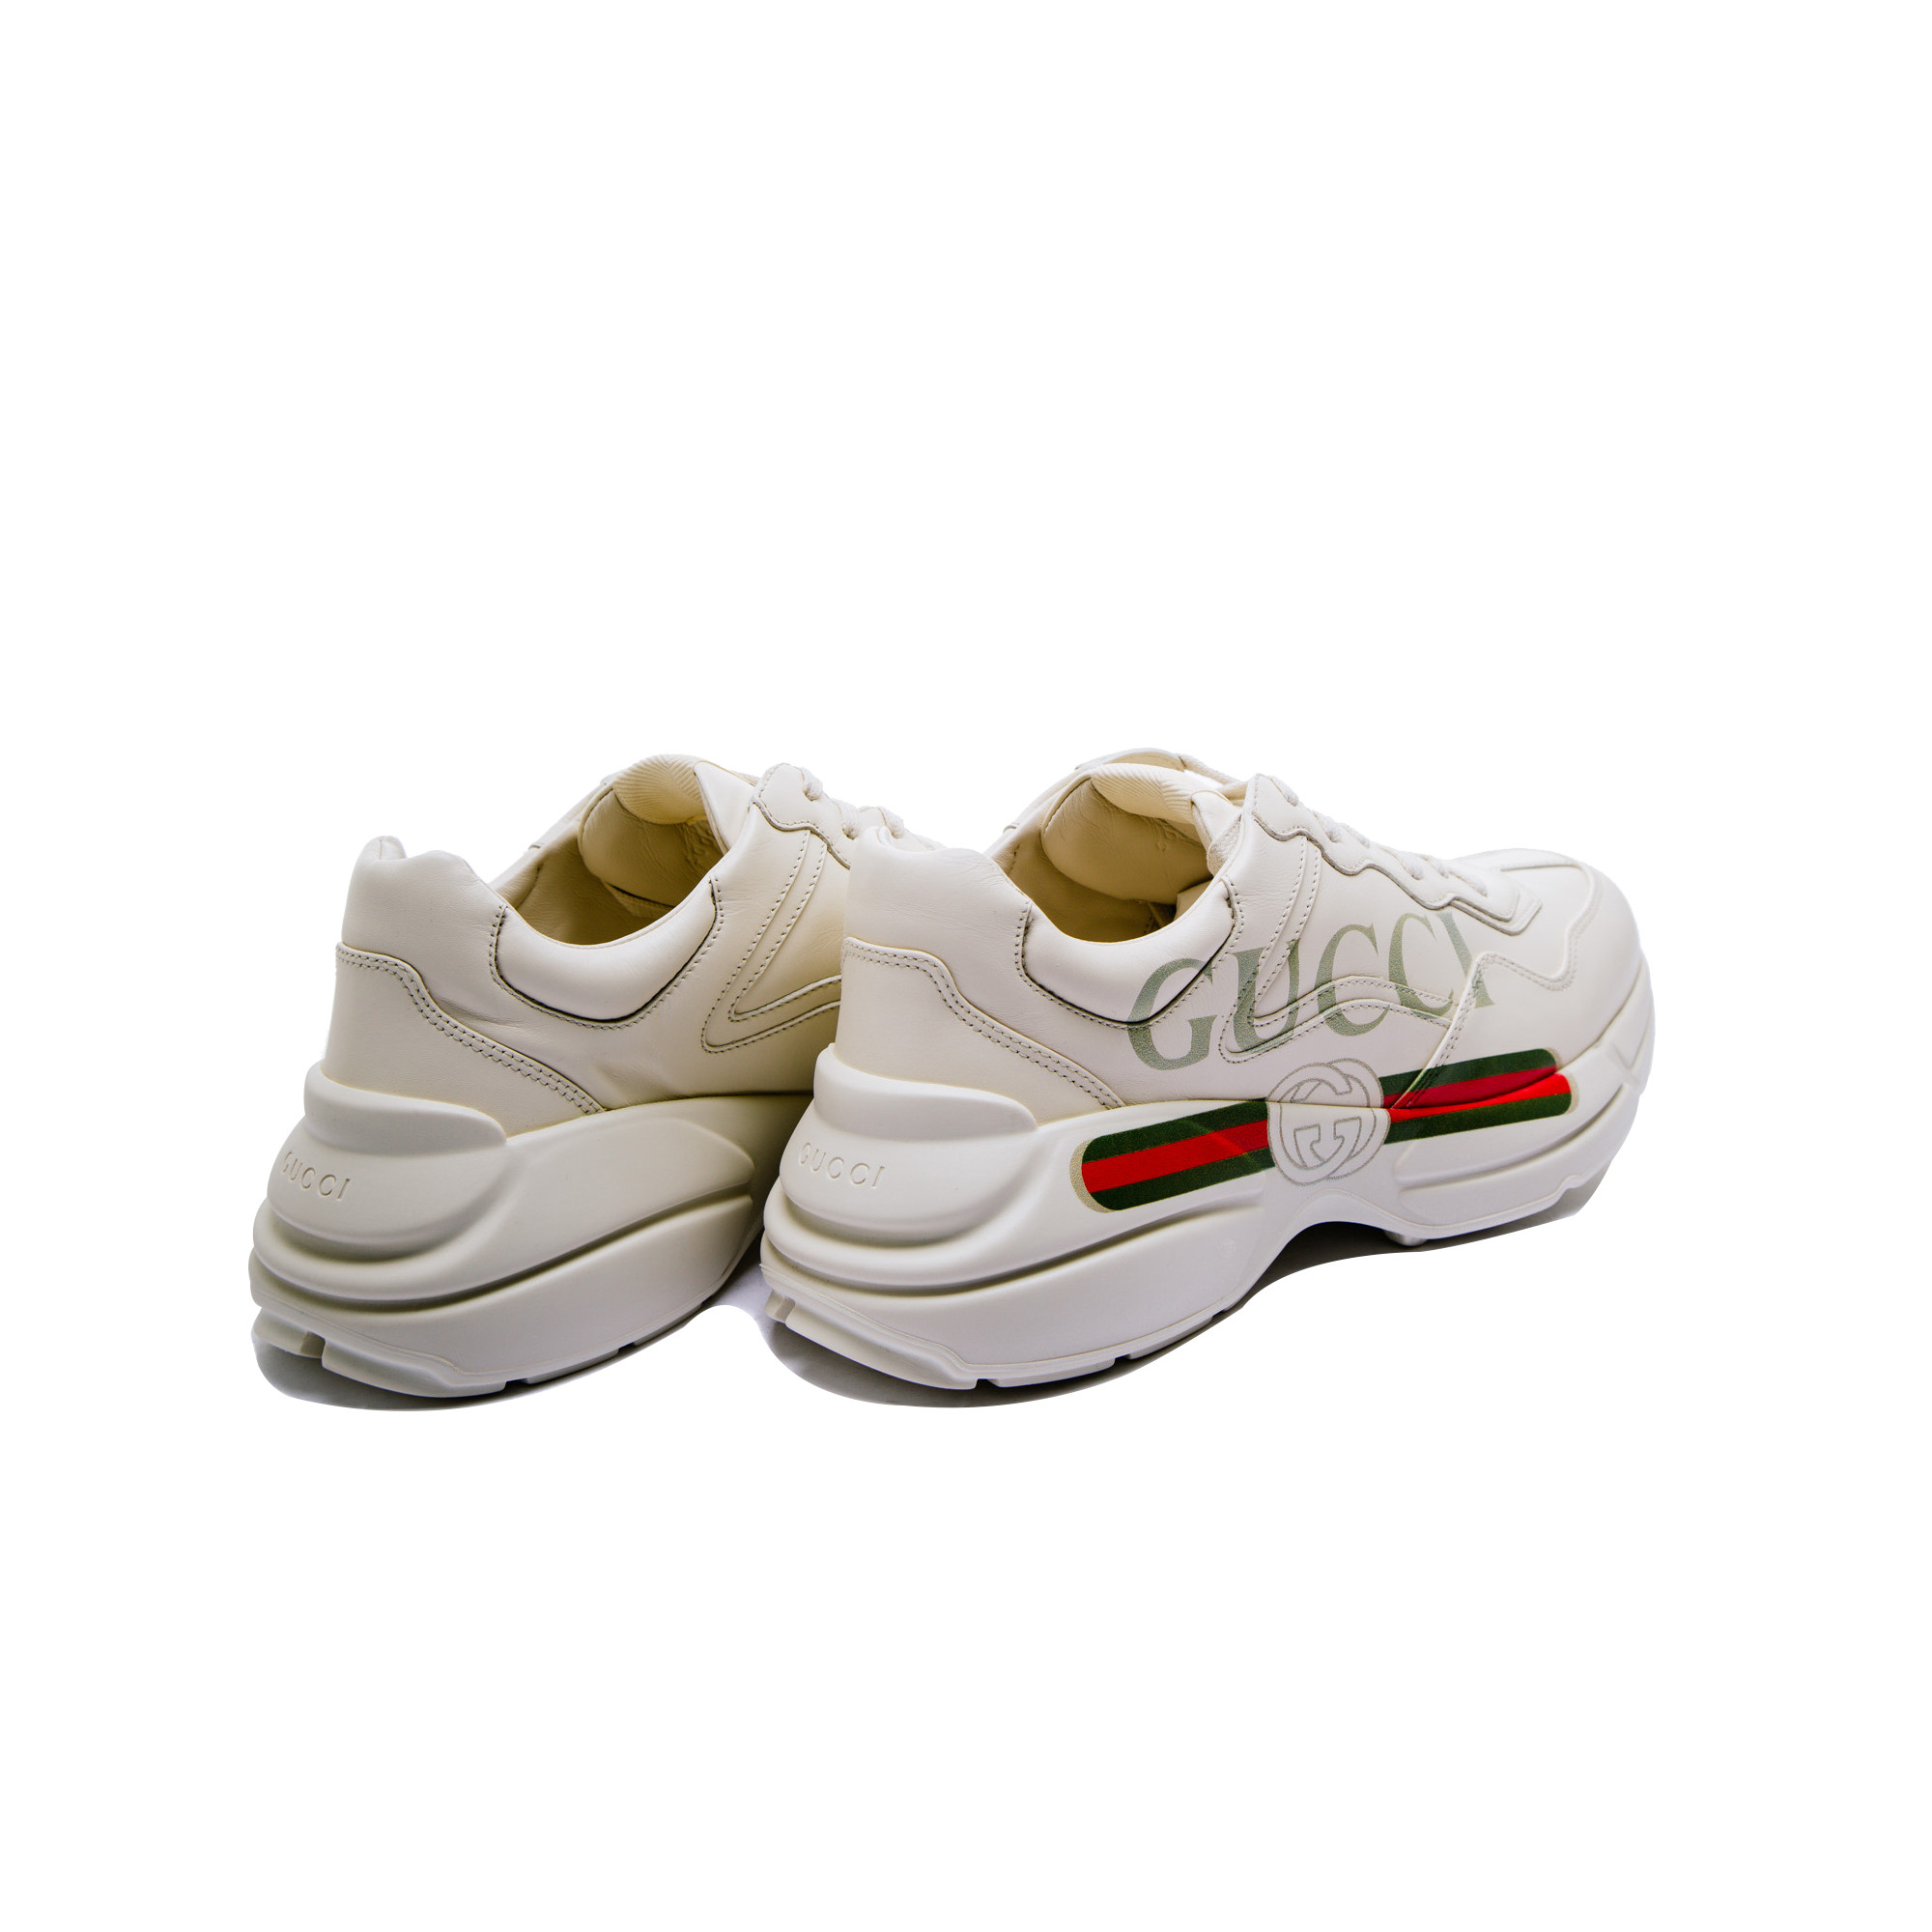 Clearance Mens Gucci Shoes